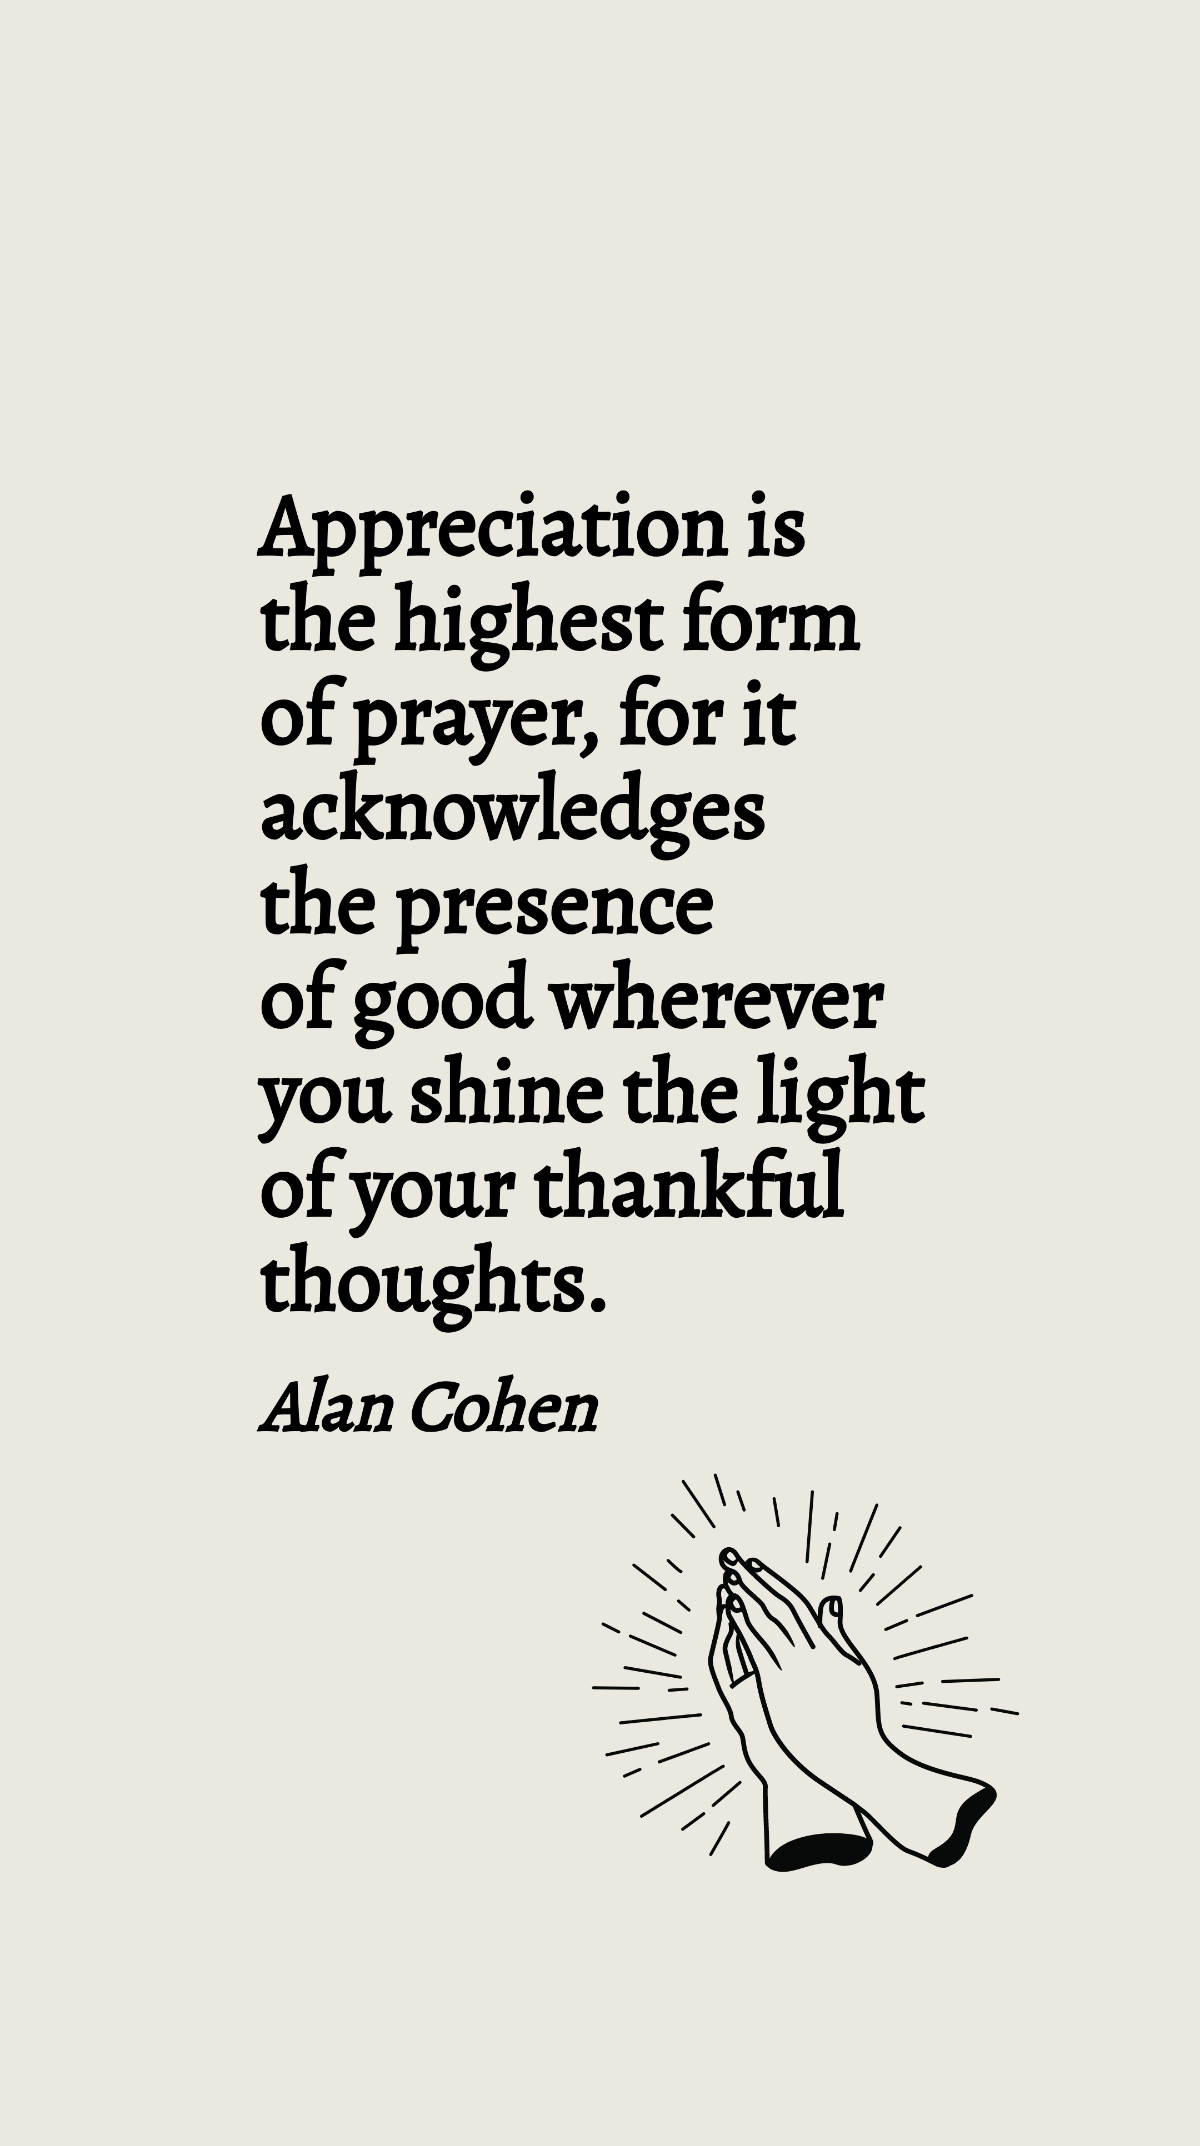 Alan Cohen - Appreciation is the highest form of prayer, for it acknowledges the presence of good wherever you shine the light of your thankful thoughts. Template